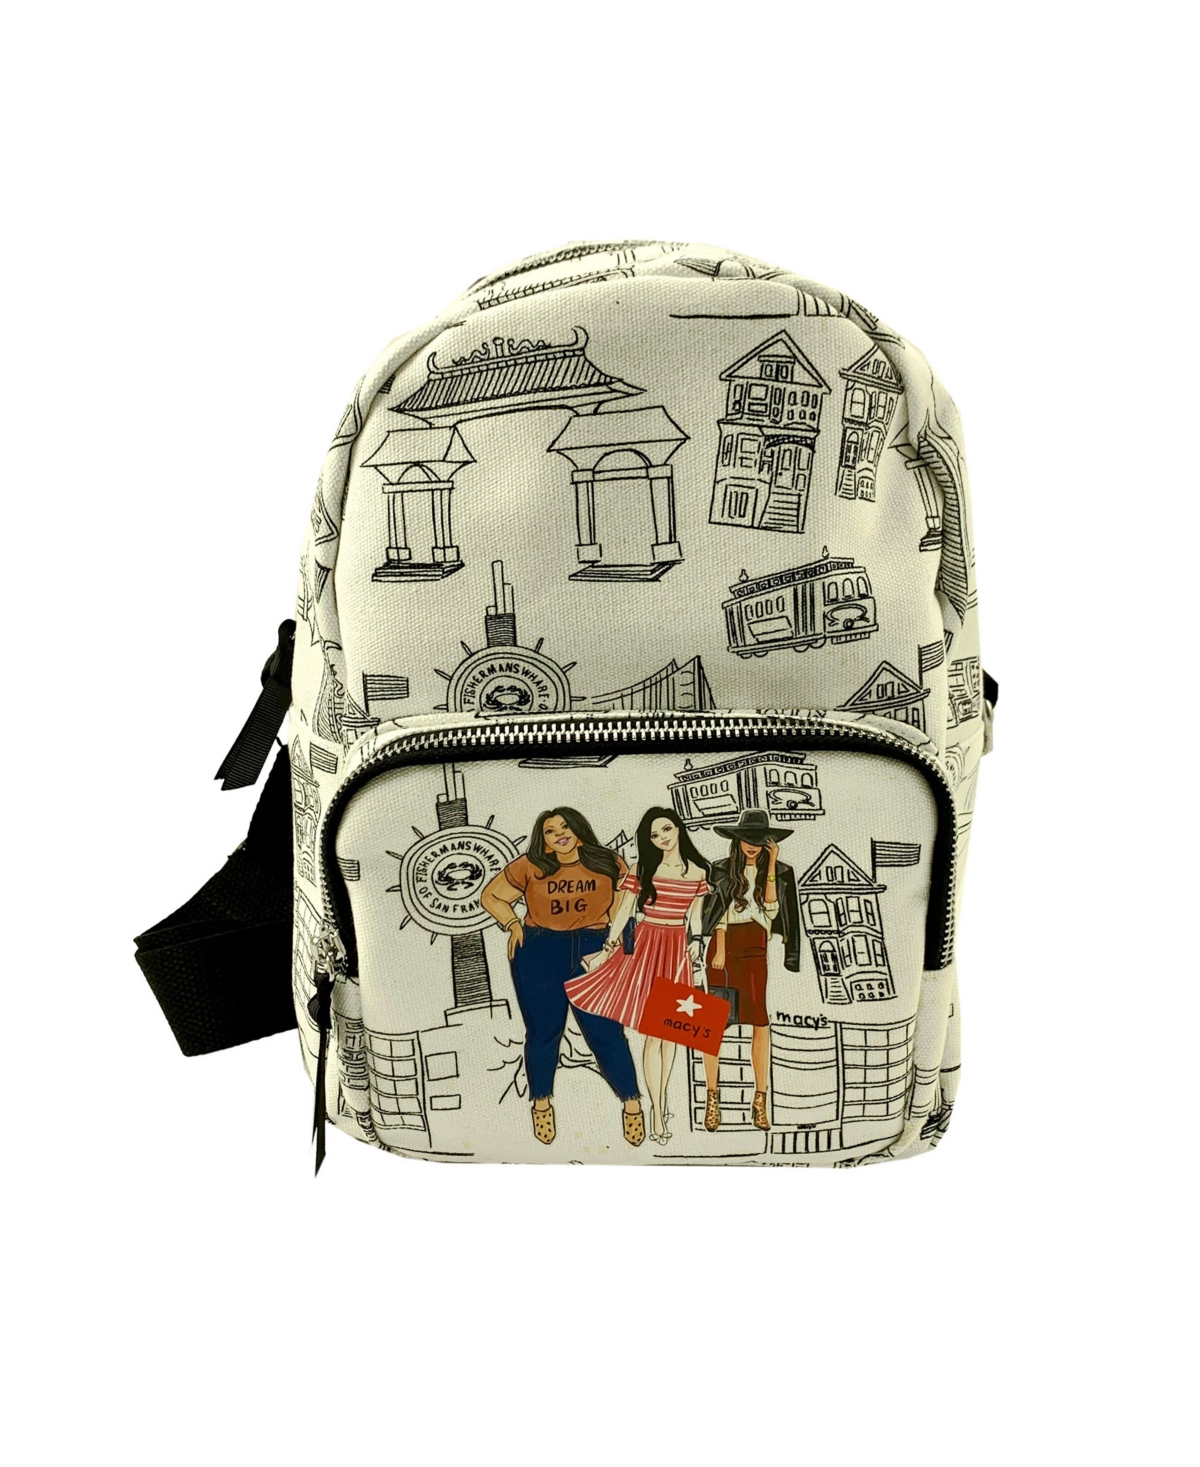 MACY'S SAN FRANCISCO CANVAS BACKPACK, CREATED FOR MACY'S